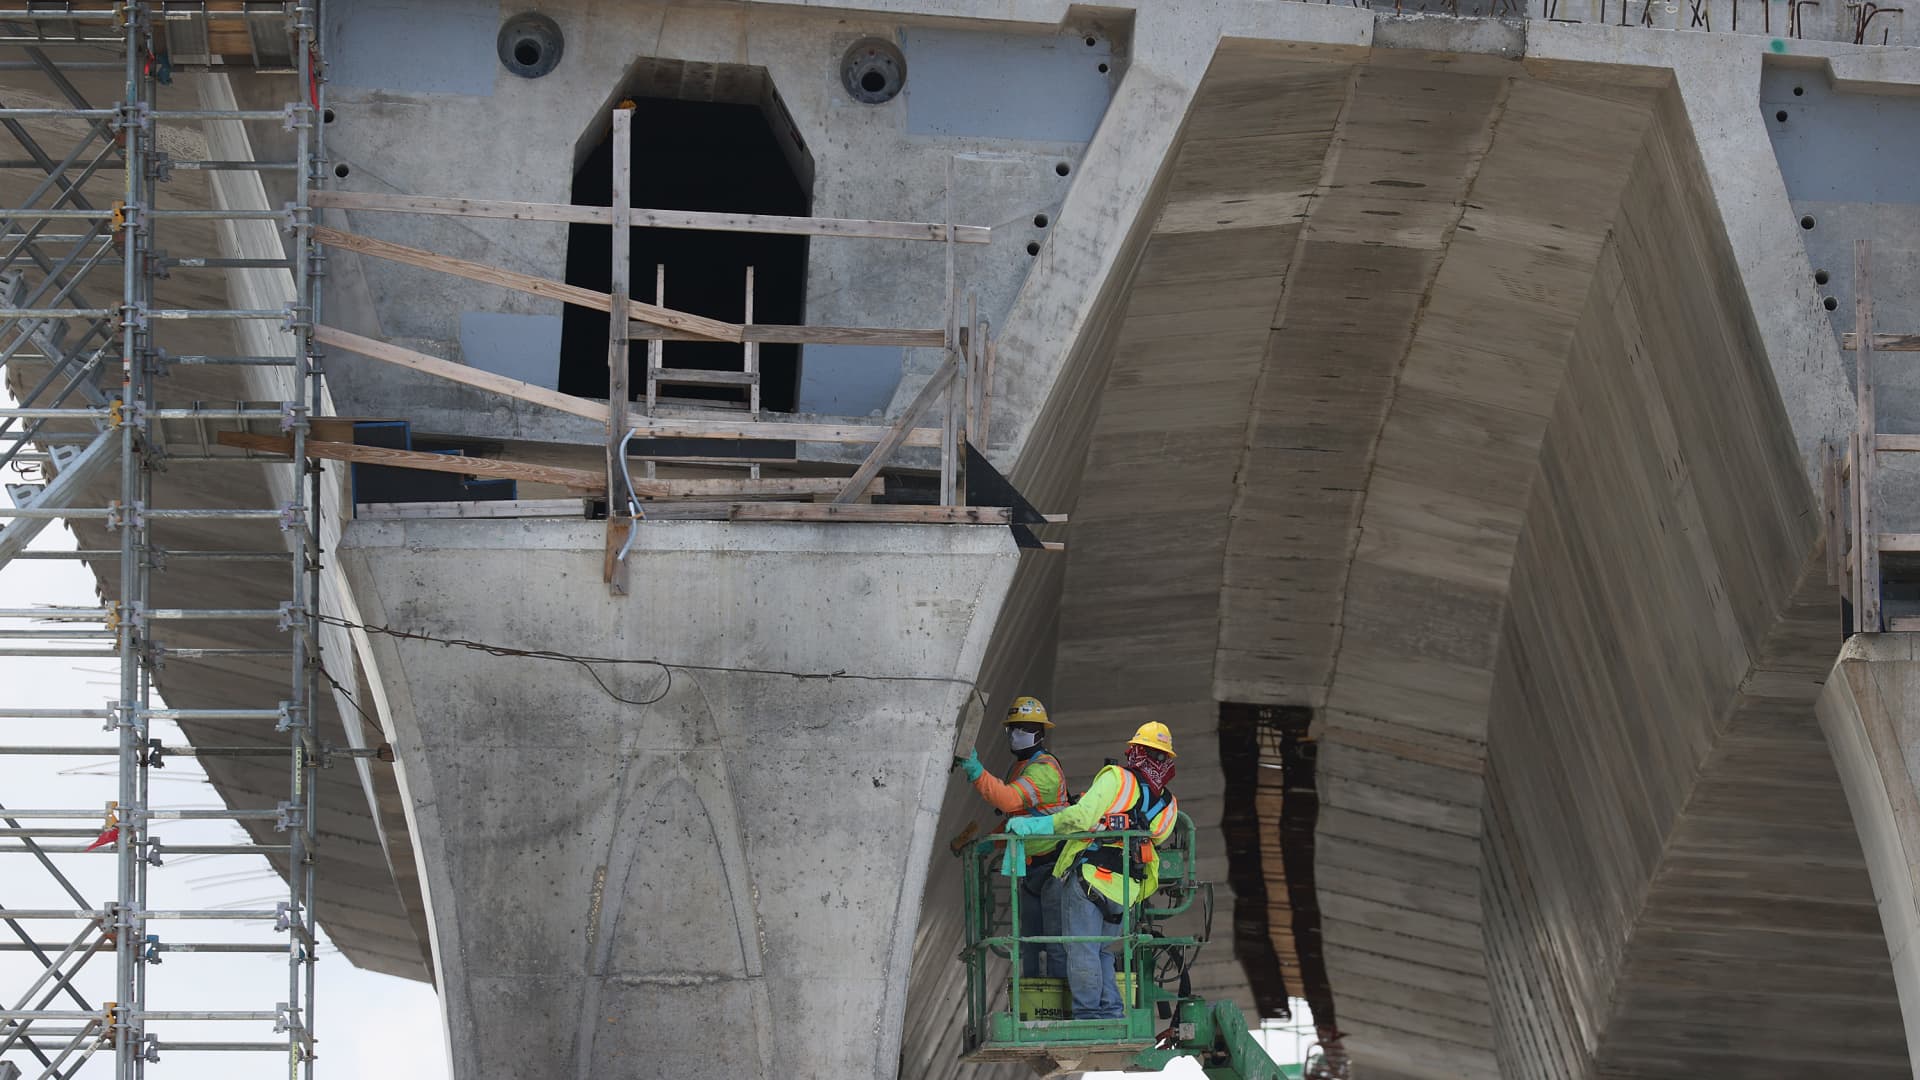 Construction workers build the “Signature Bridge,” replacing and improving a busy highway intersection at I-95 and I-395 on March 17, 2021 in Miami, Florida.